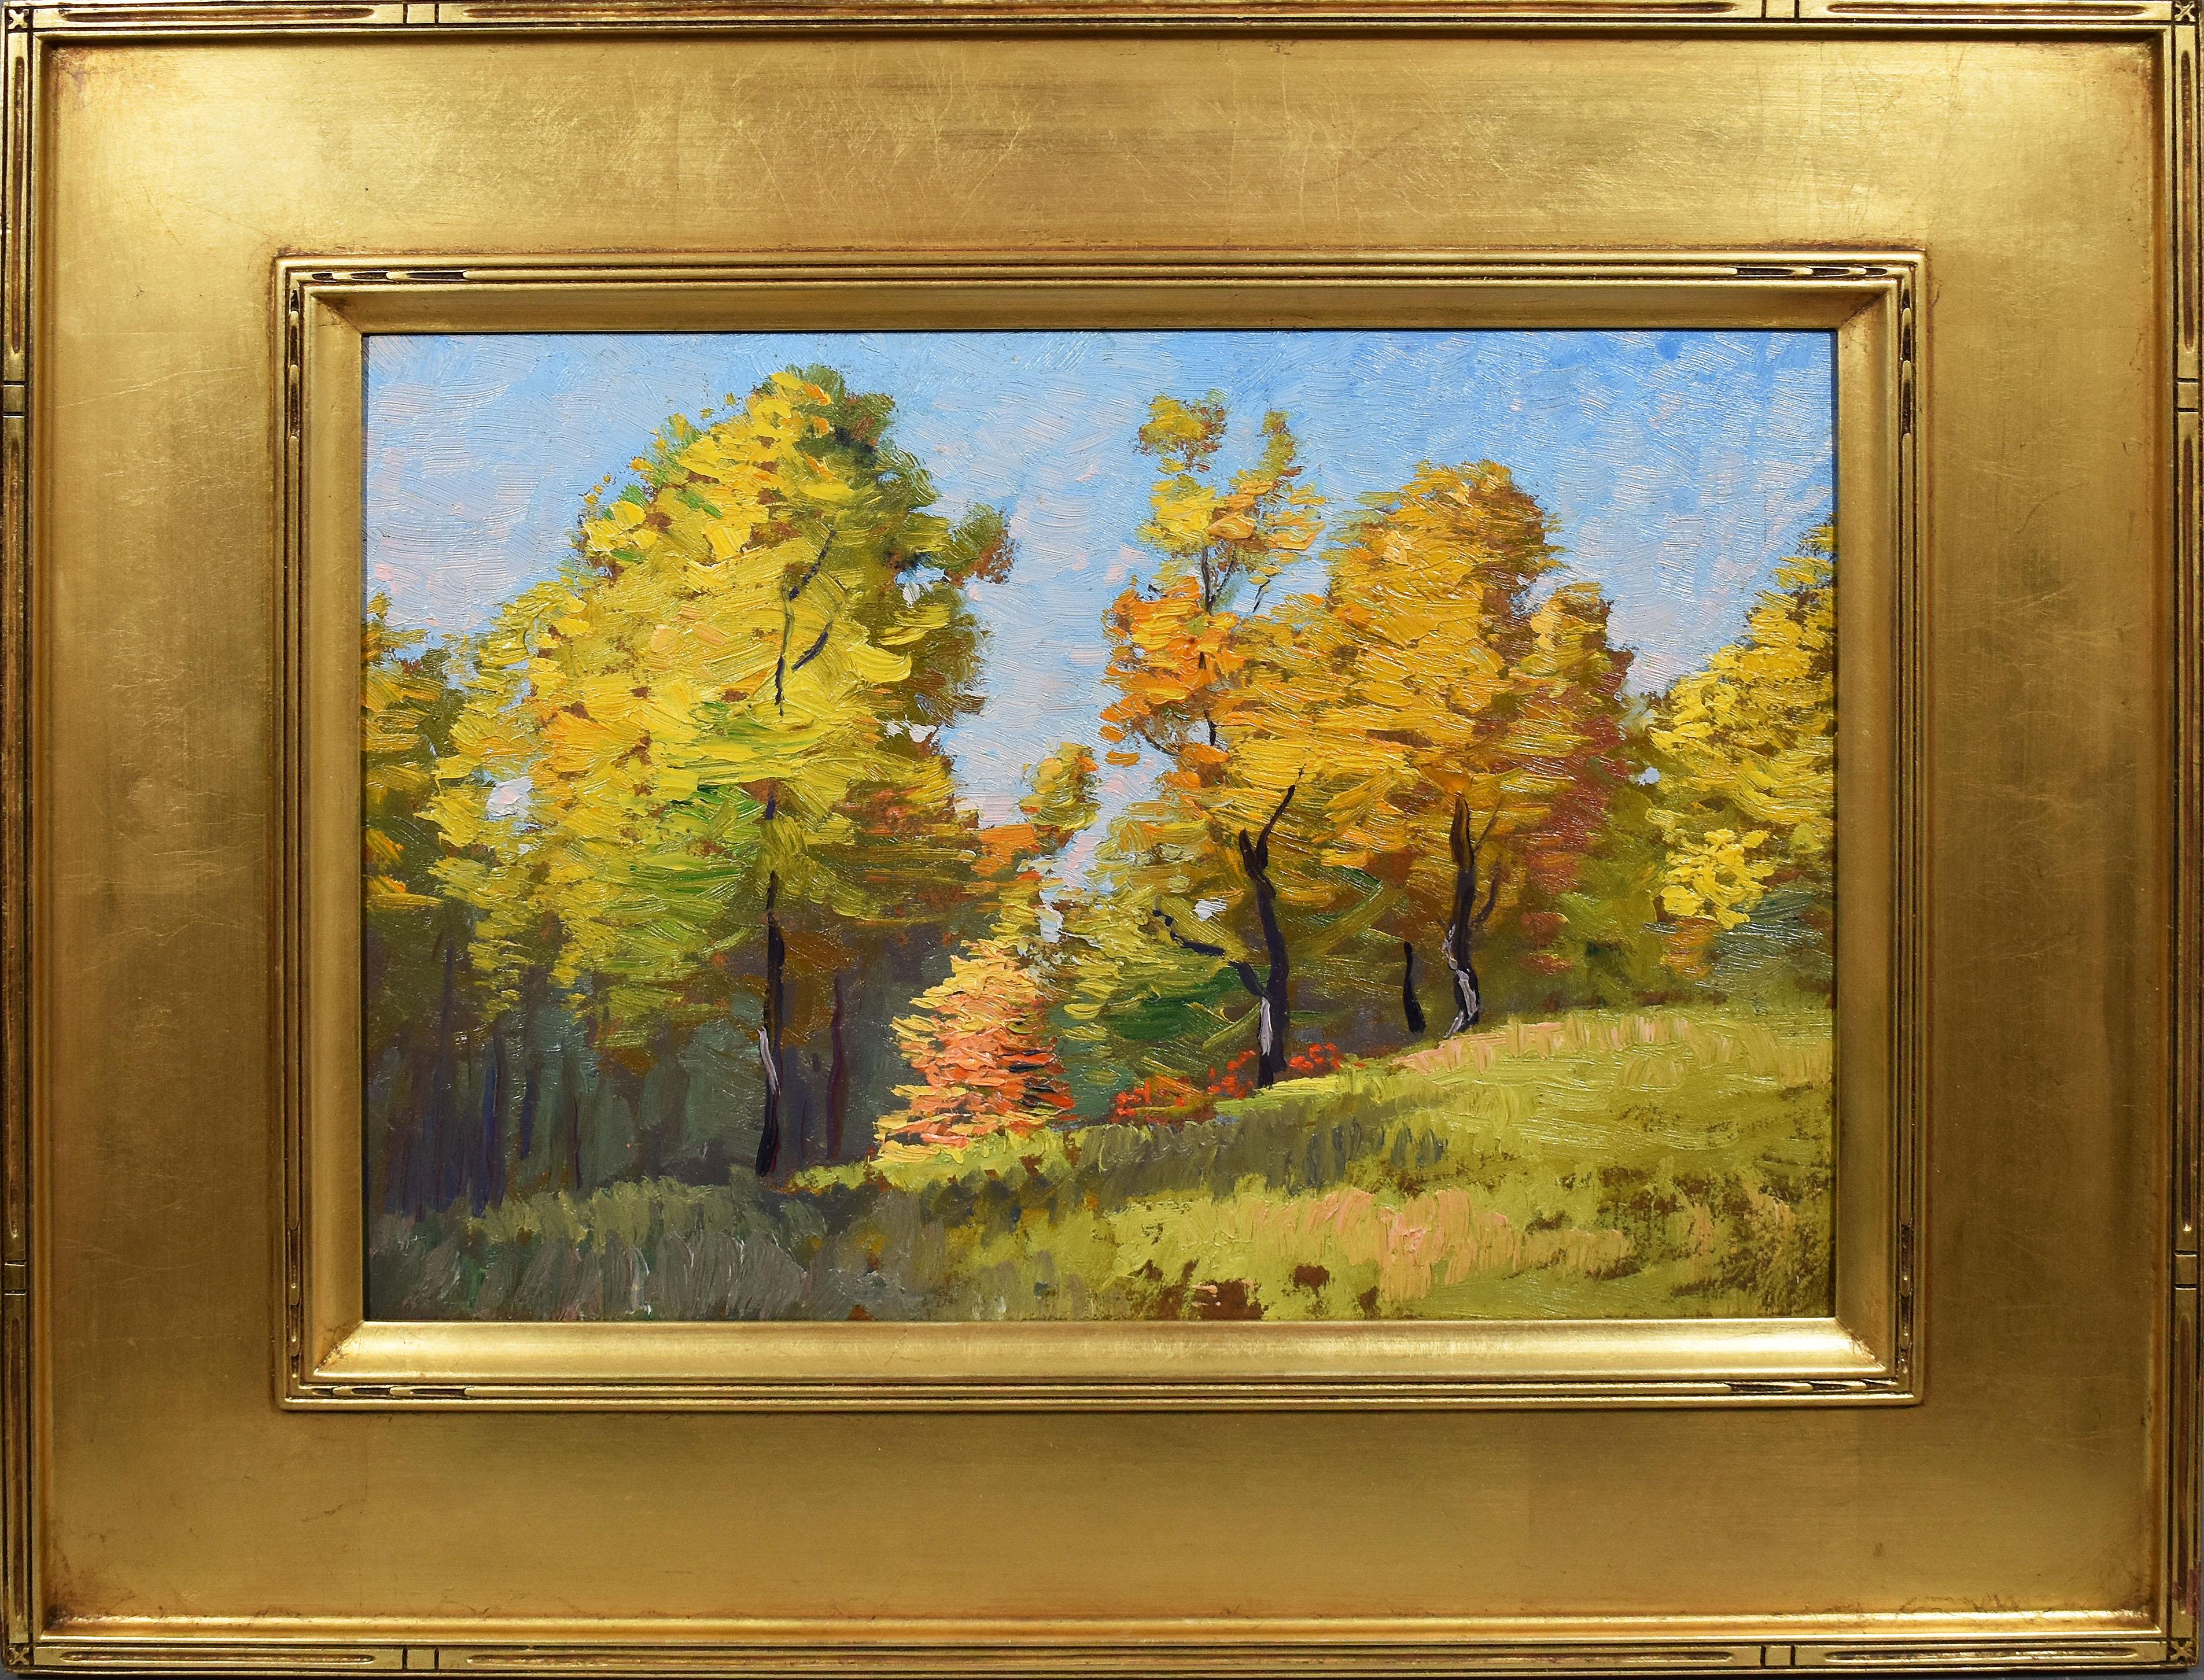 Will Hutchins Landscape Painting - Antique American Impressionist Plein Air Forest Landscape Signed Oil Painting